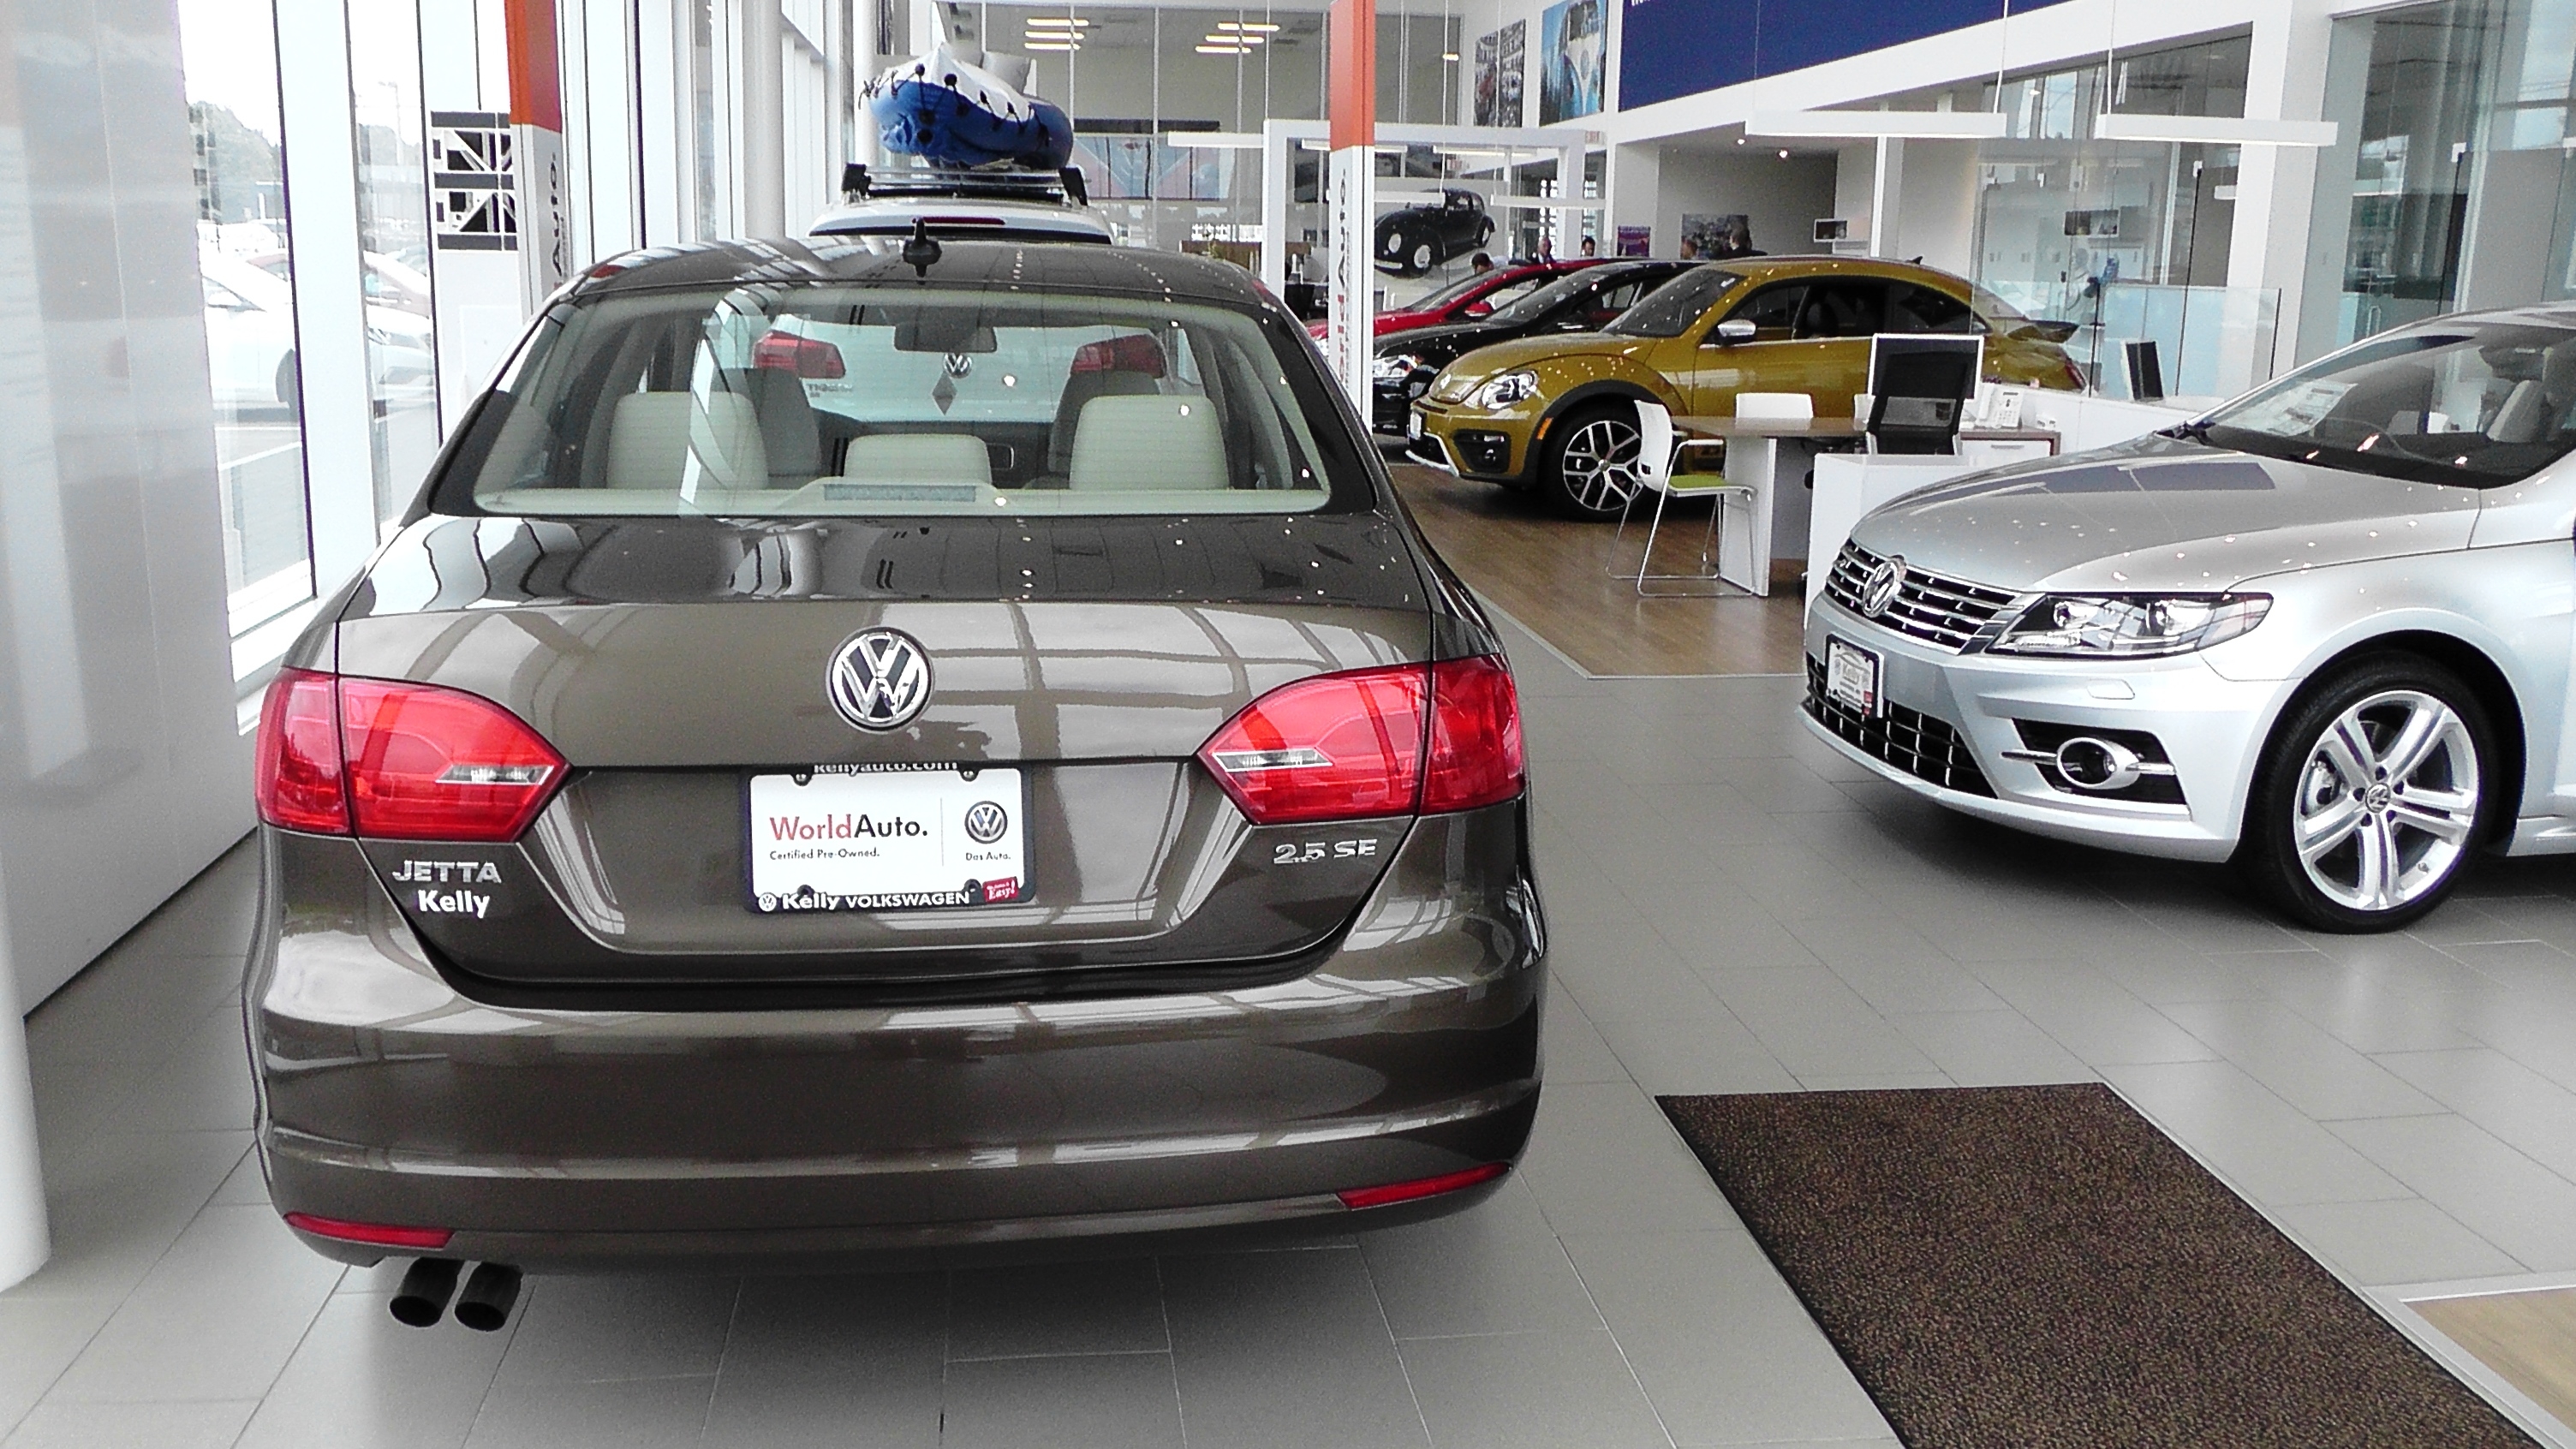 With plenty of Volkswagen models on display and our friendly VW Product Specialists here to help you, you'll feel comfortable as you browse our showroom at Kelly Volkswagen in Danvers, MA. Visit us today for your next purchase, you'll be so glad you did!